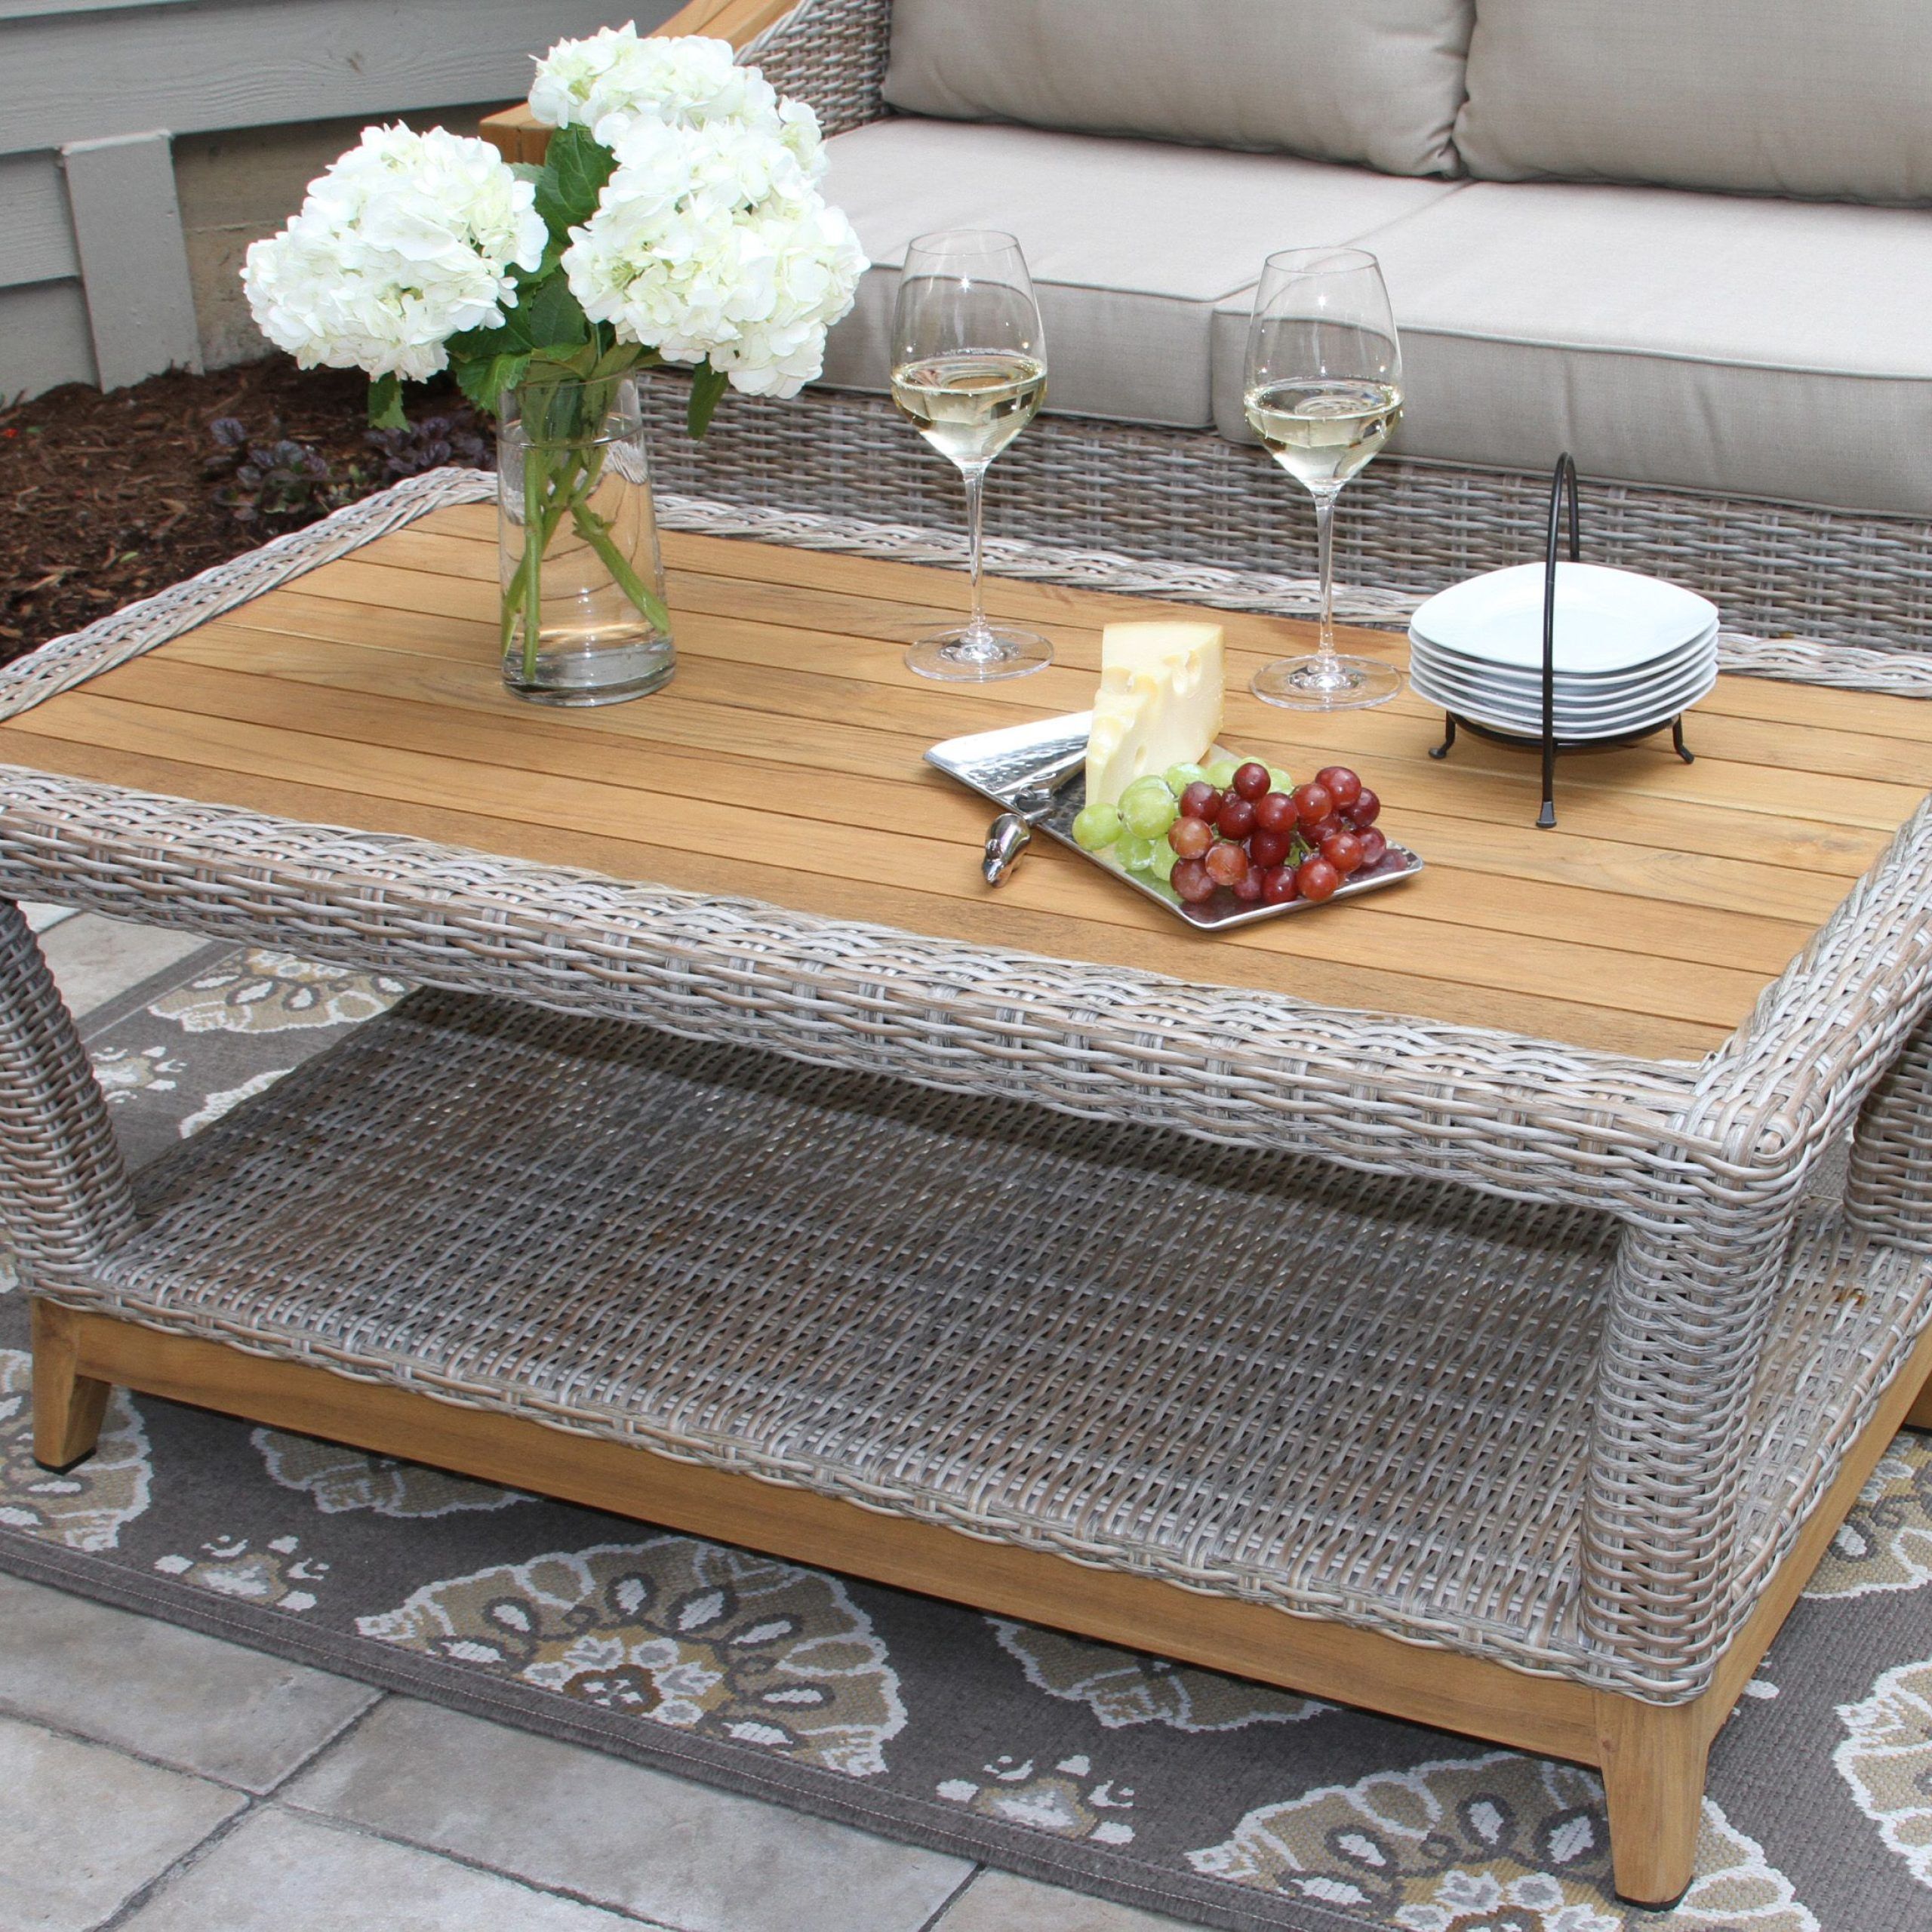 How To Decorate An Outdoor Coffee Table – Coffee Table Decor With Regard To Outdoor Half Round Coffee Tables (Gallery 8 of 20)